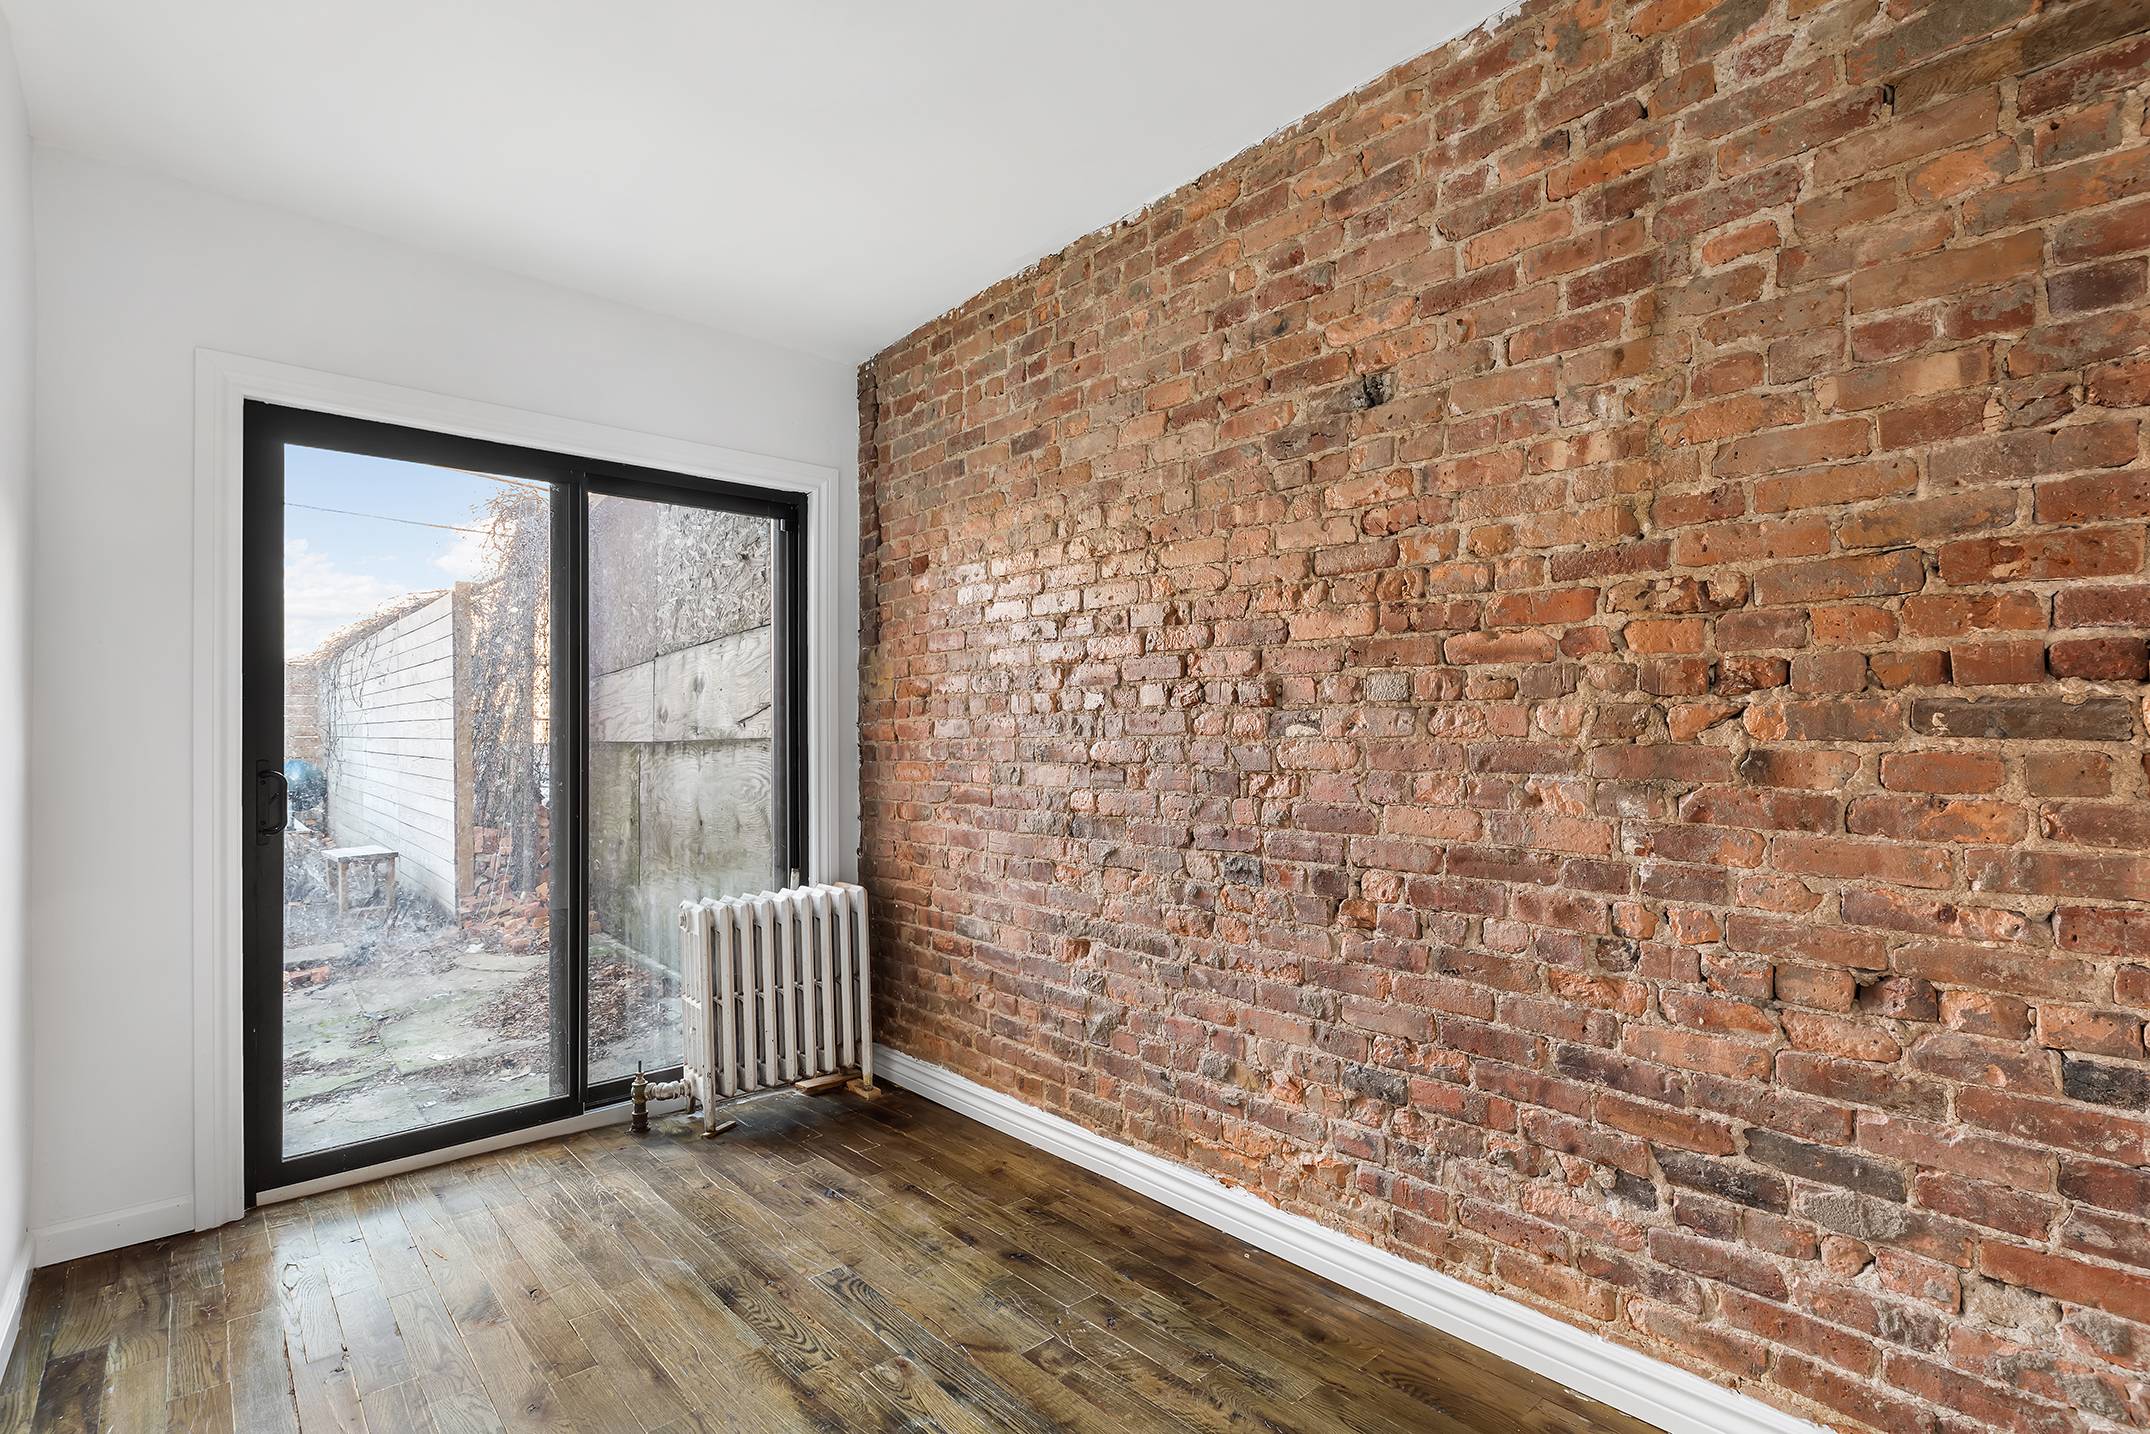 2 Bedrooms with home office, 1 Bathroom and Outdoor Space on prime Bed Stuy block.